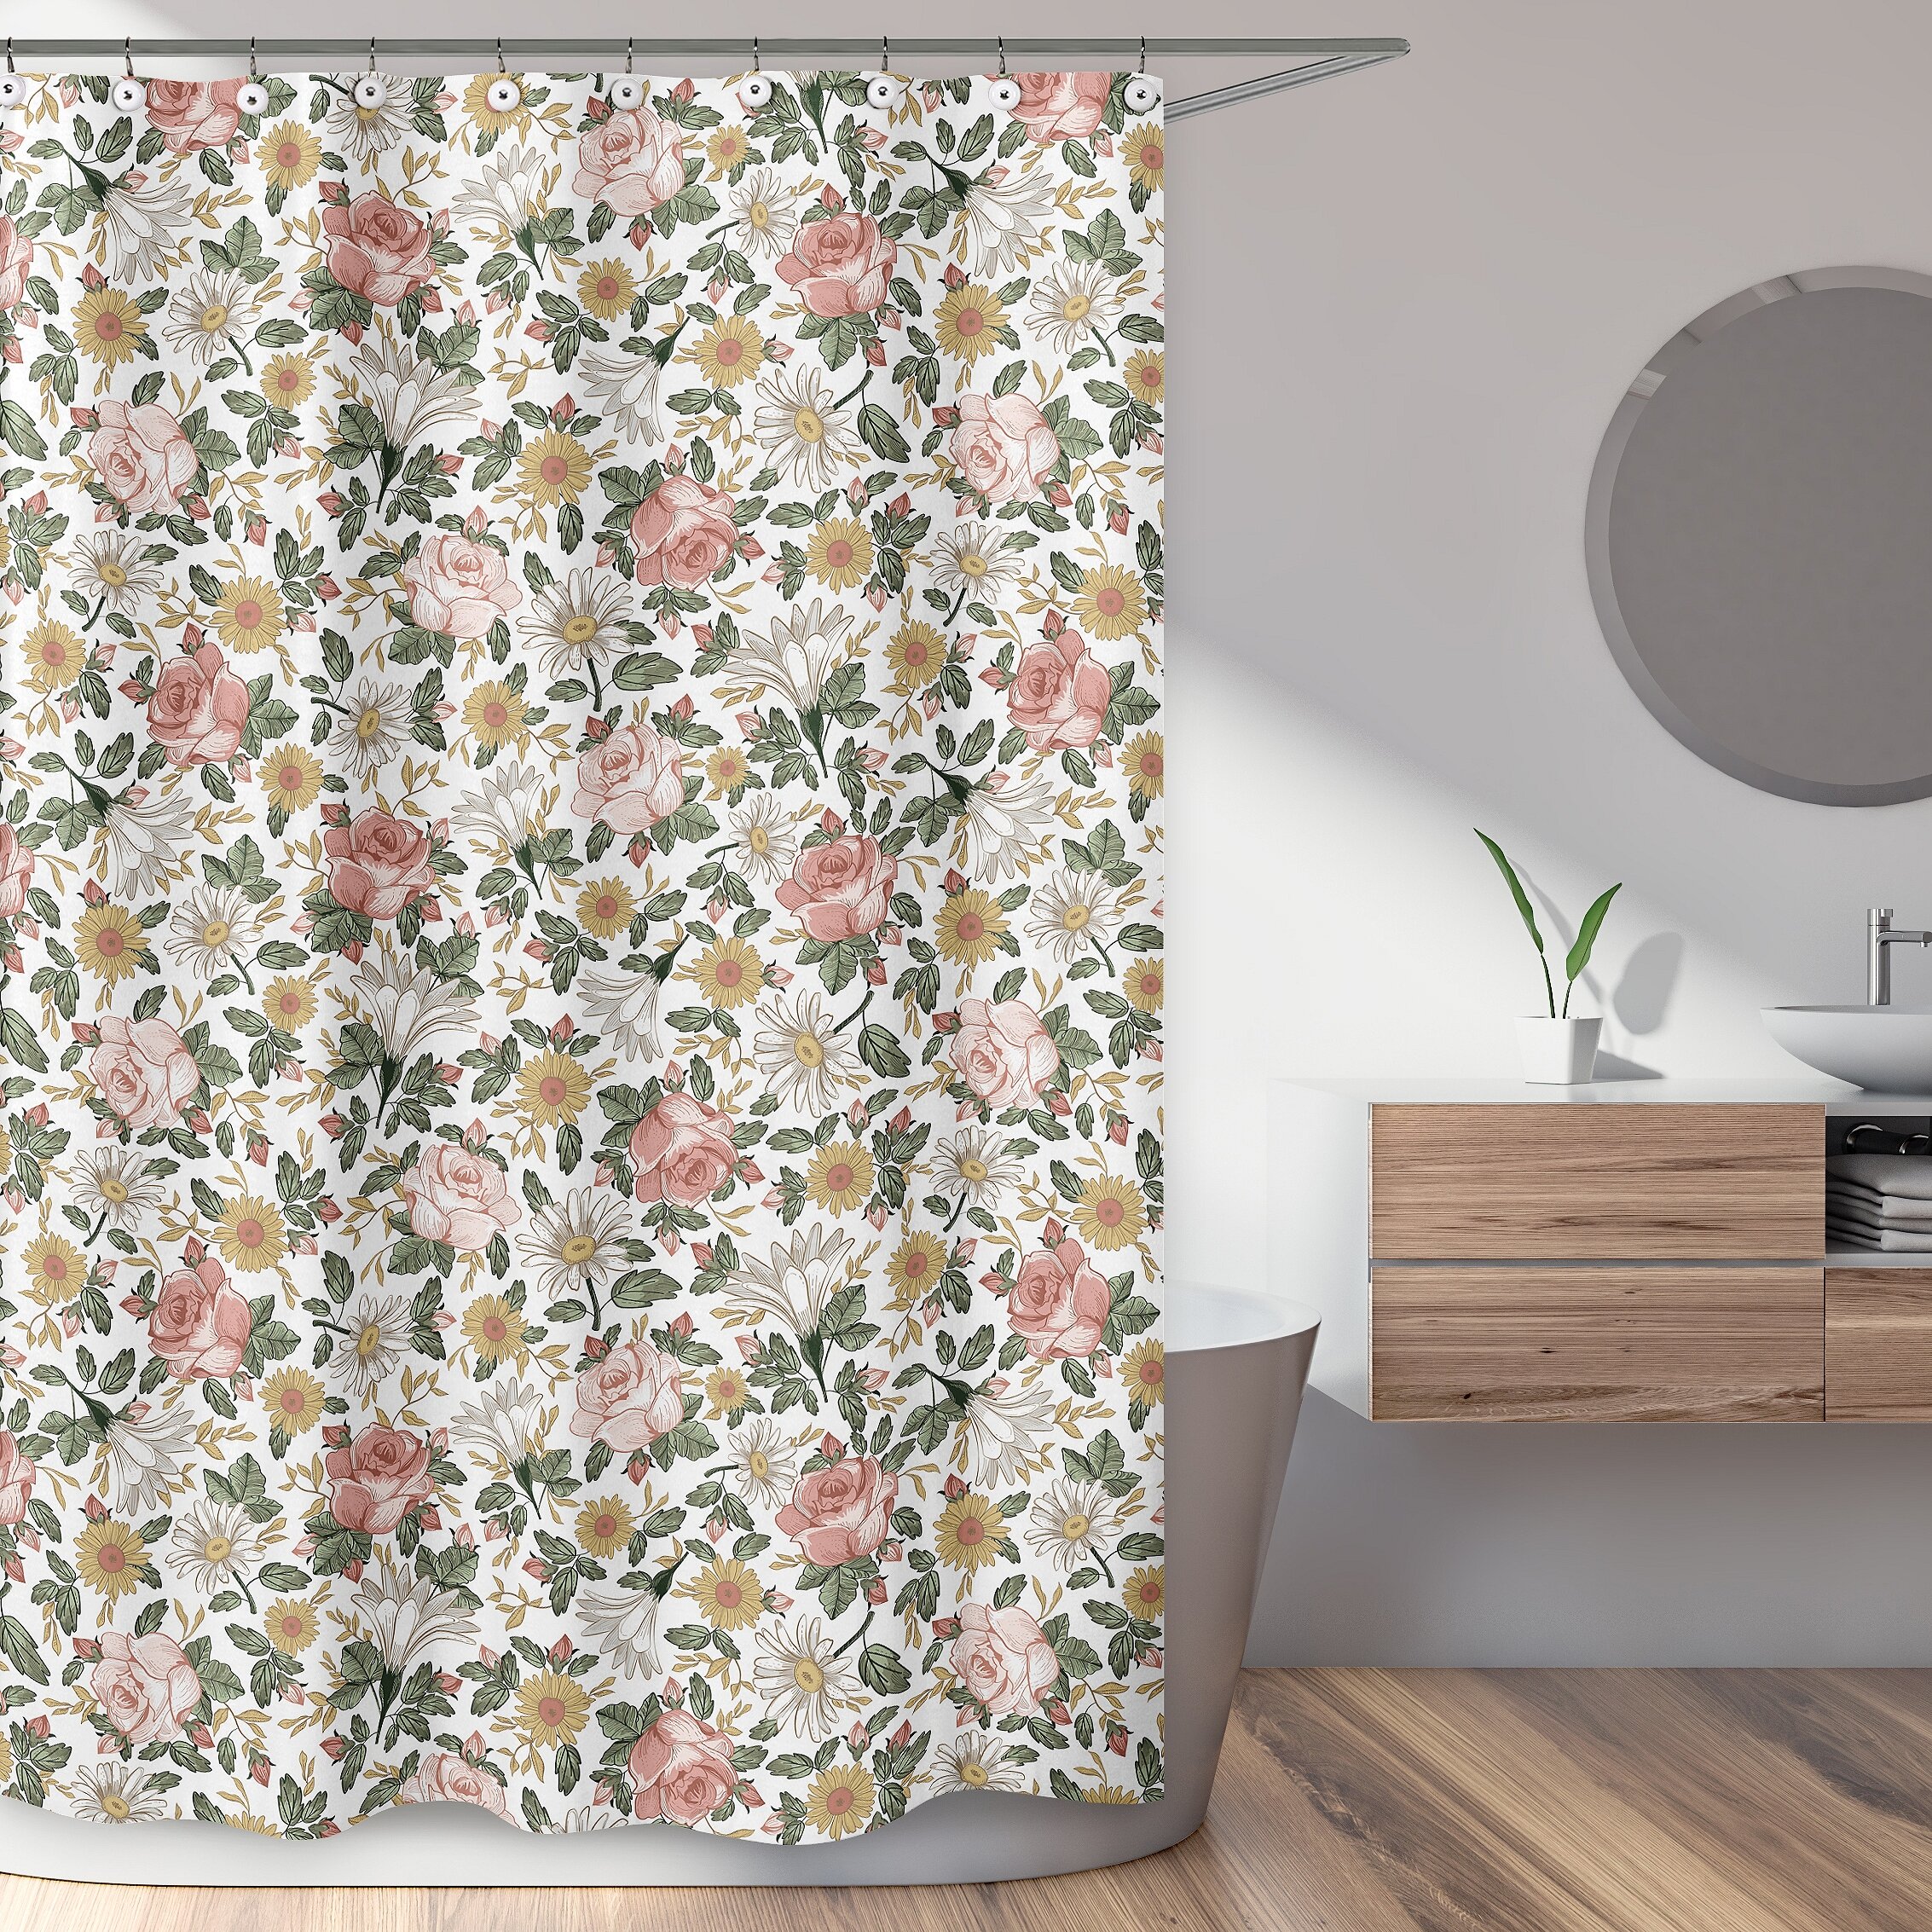 Details about   Gray Shower Curtain Curly Retro Floral Design Print for Bathroom 